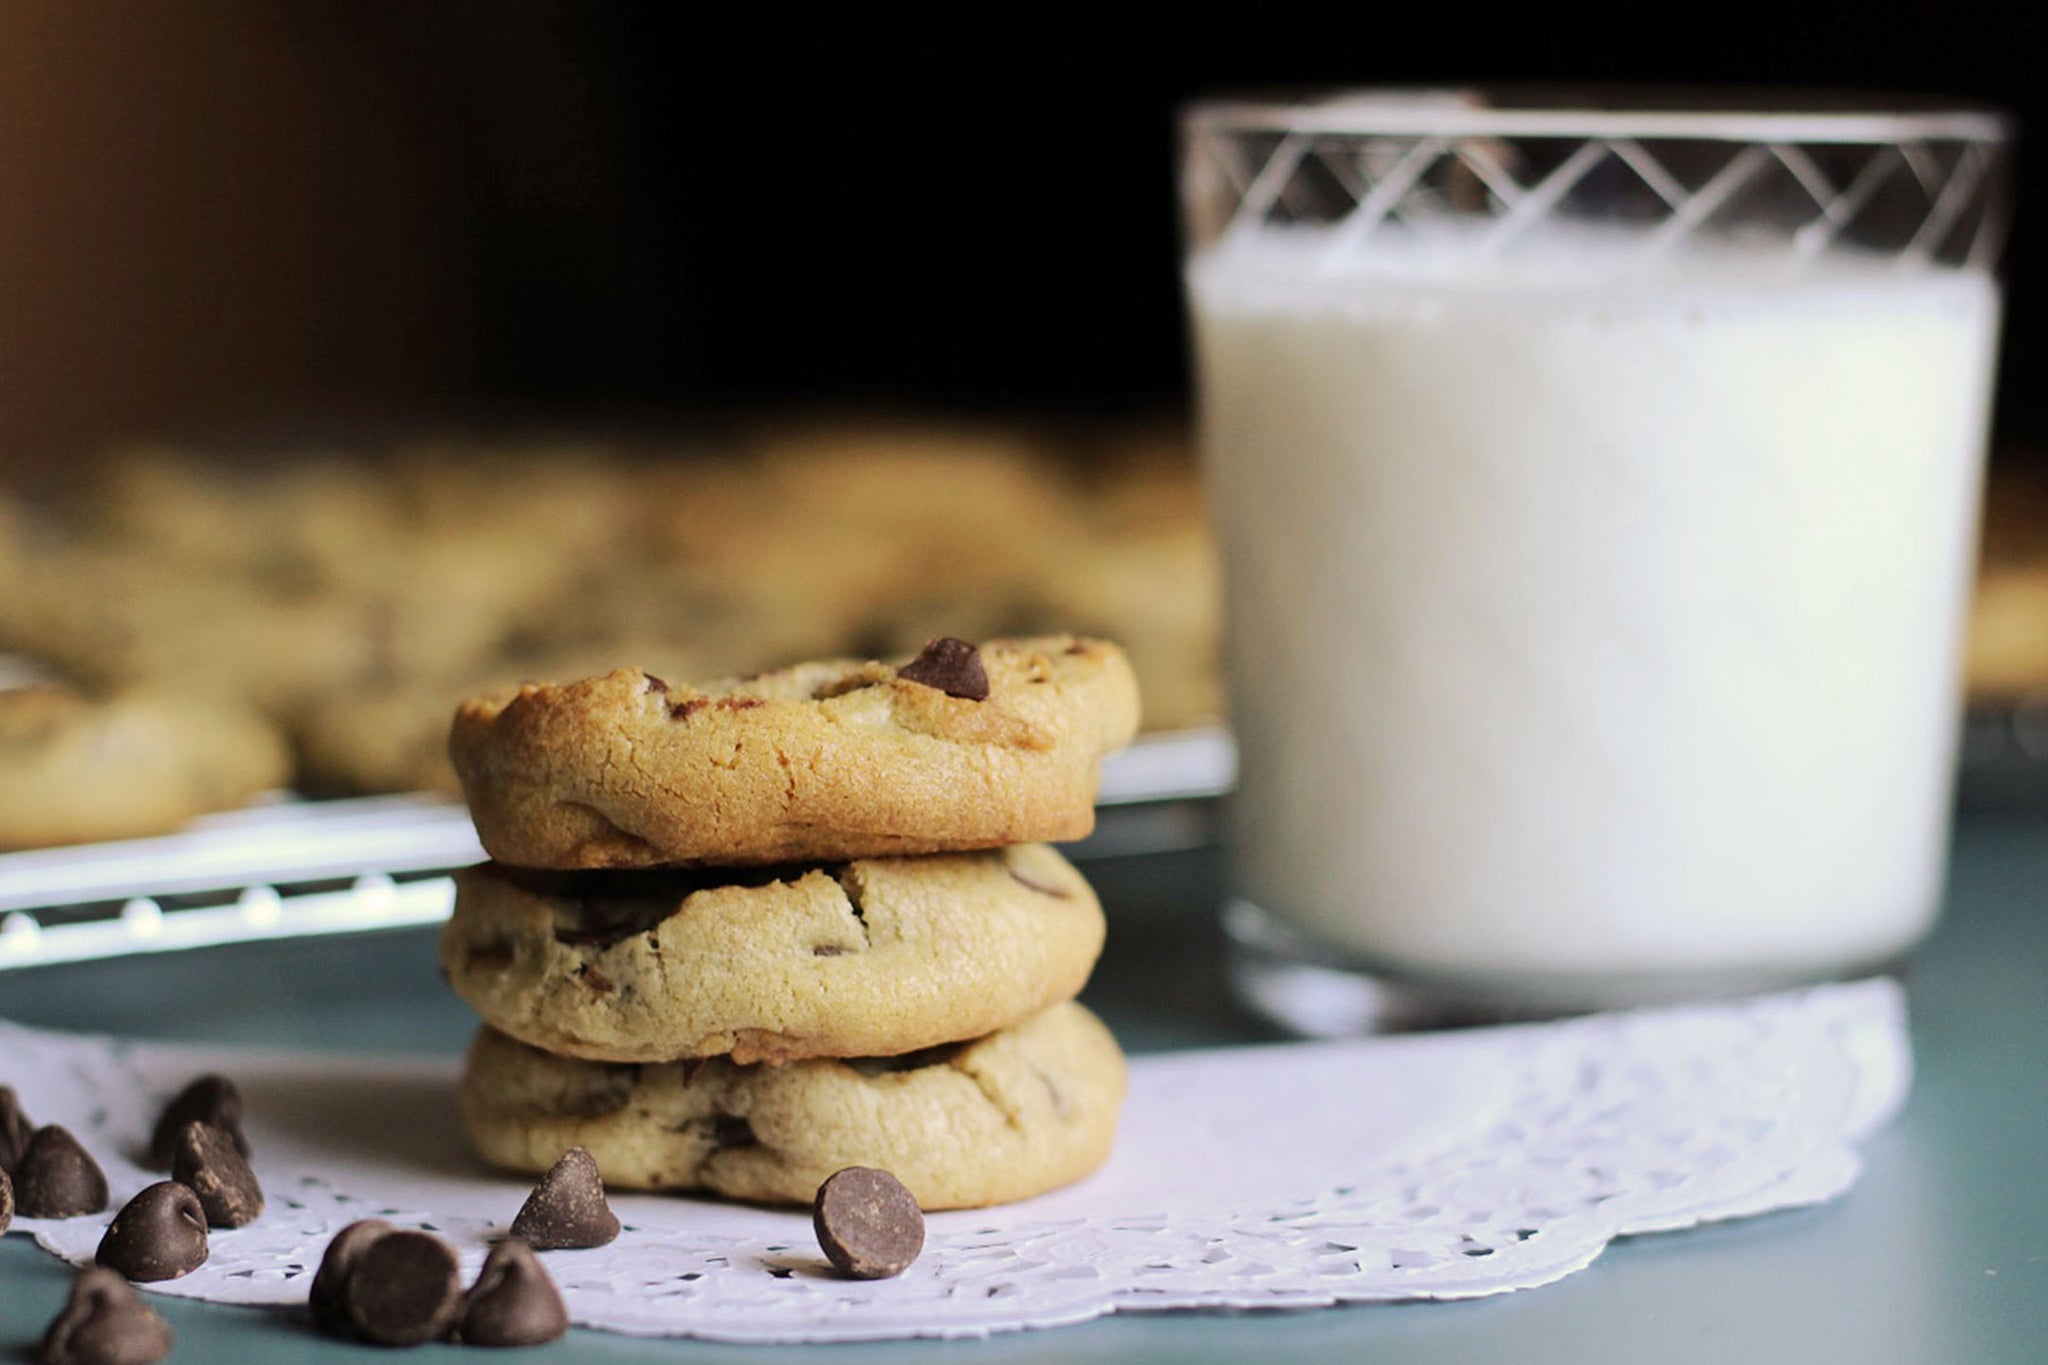 Herbal Infused Chocolate Chip Cookies from Scratch